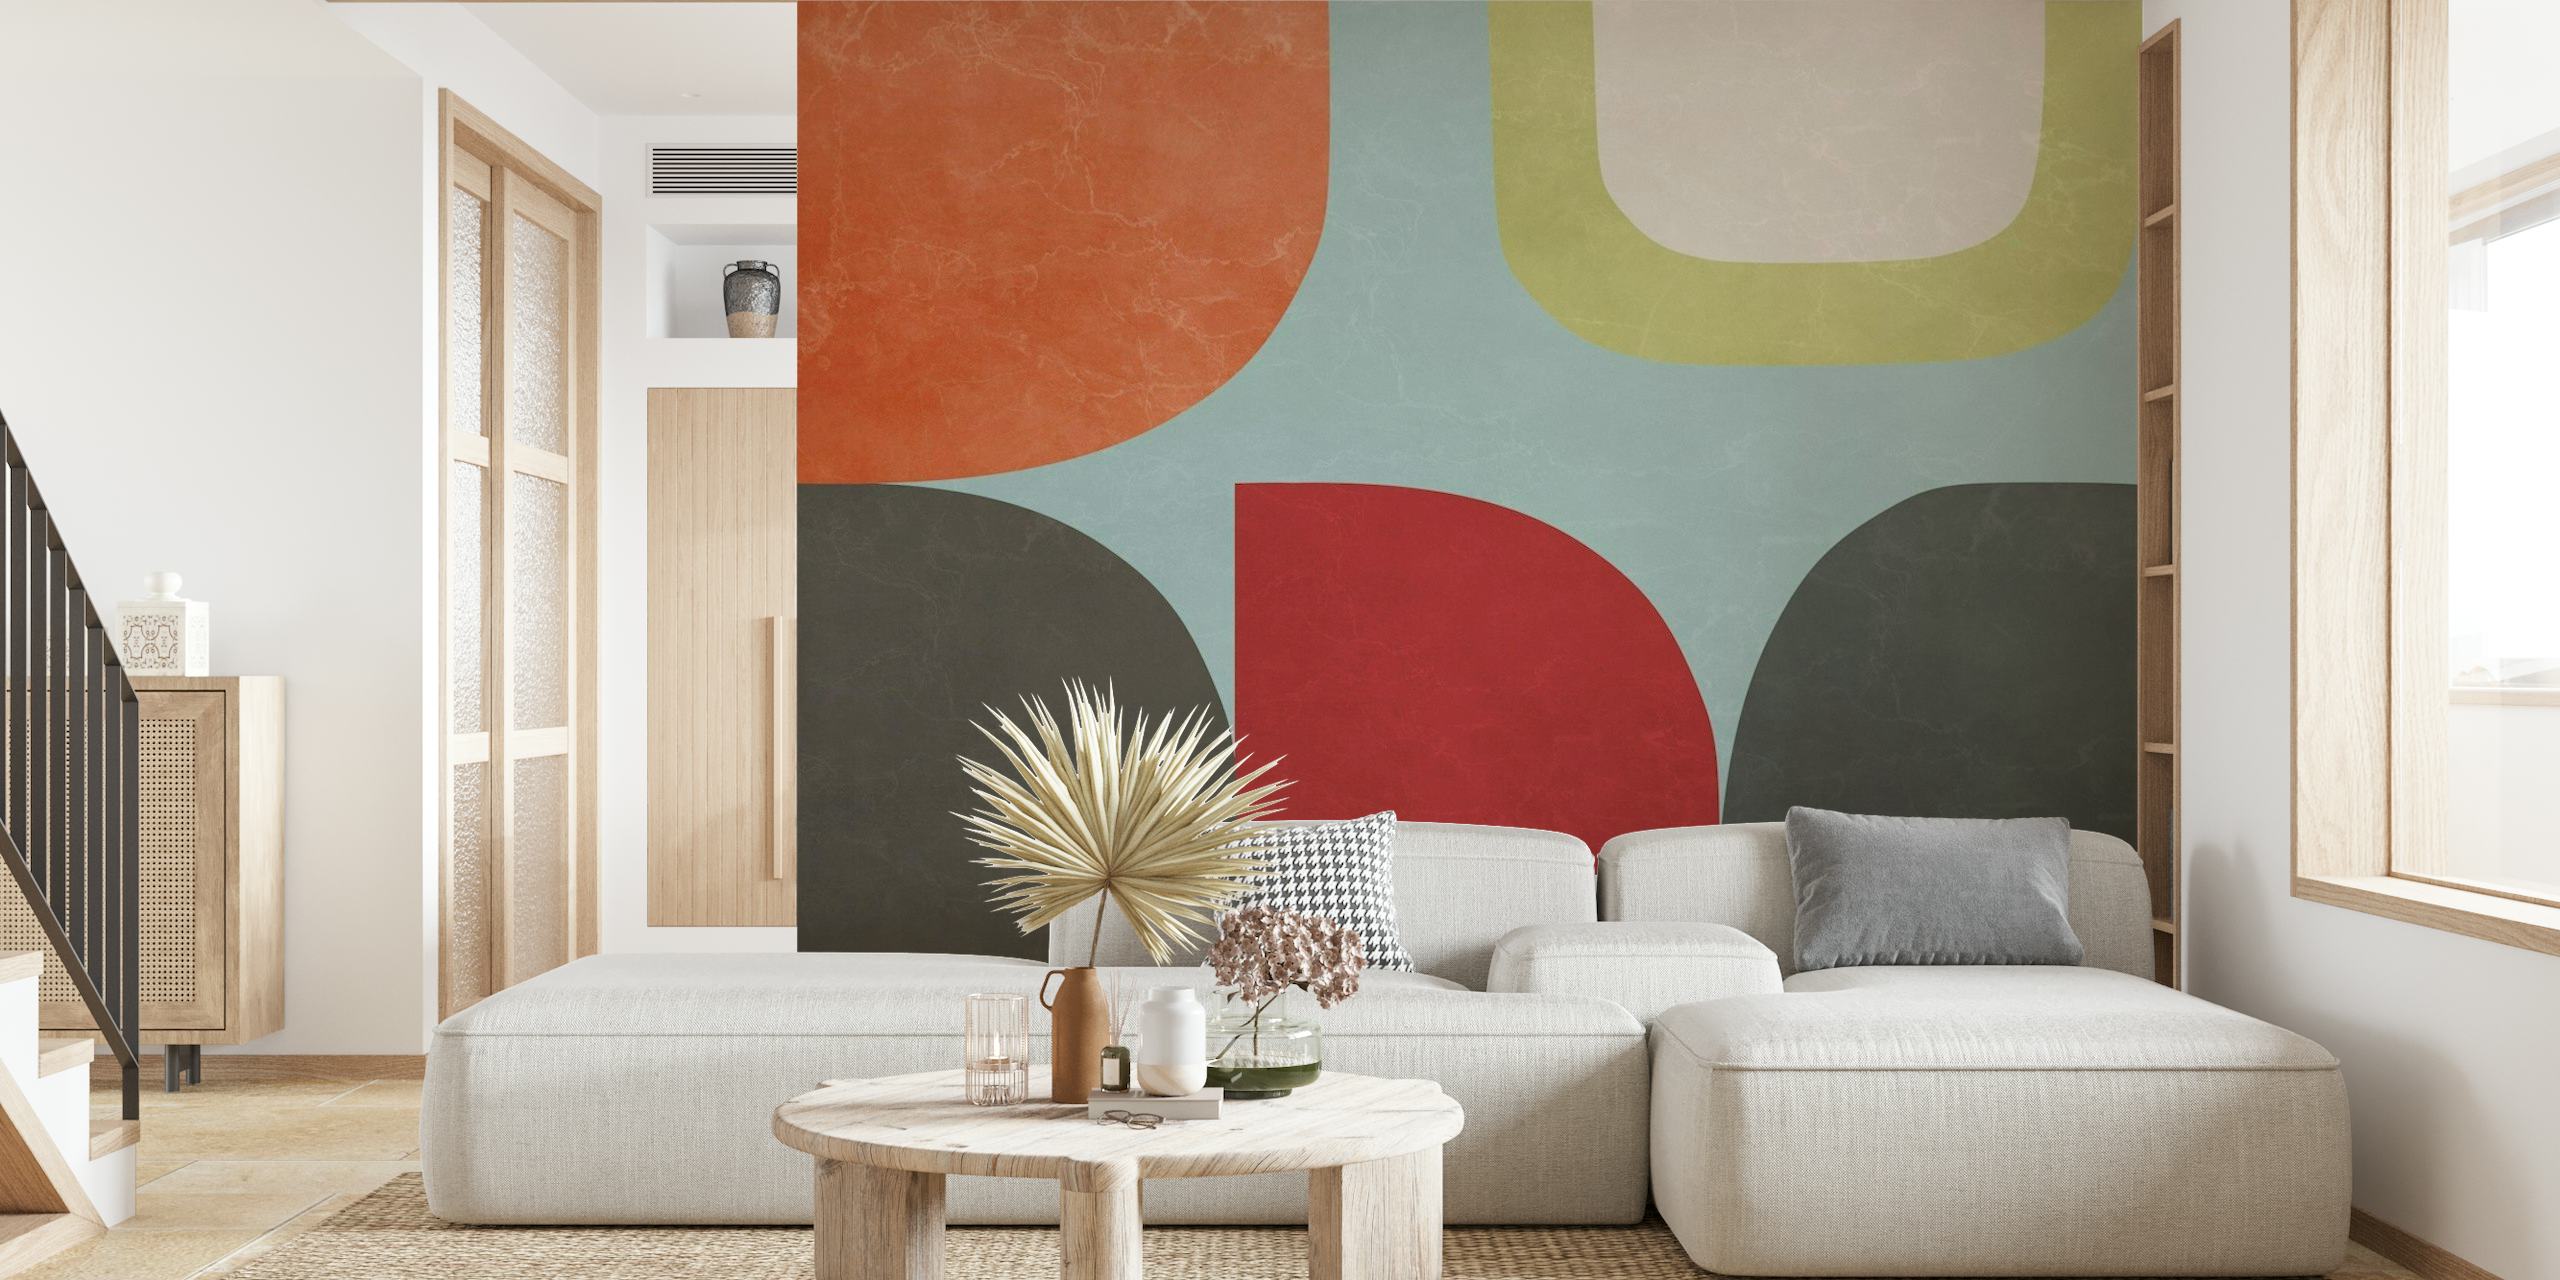 Minimalist Chic Abstract wall mural with geometric shapes in terracotta, blue, yellow, and gray